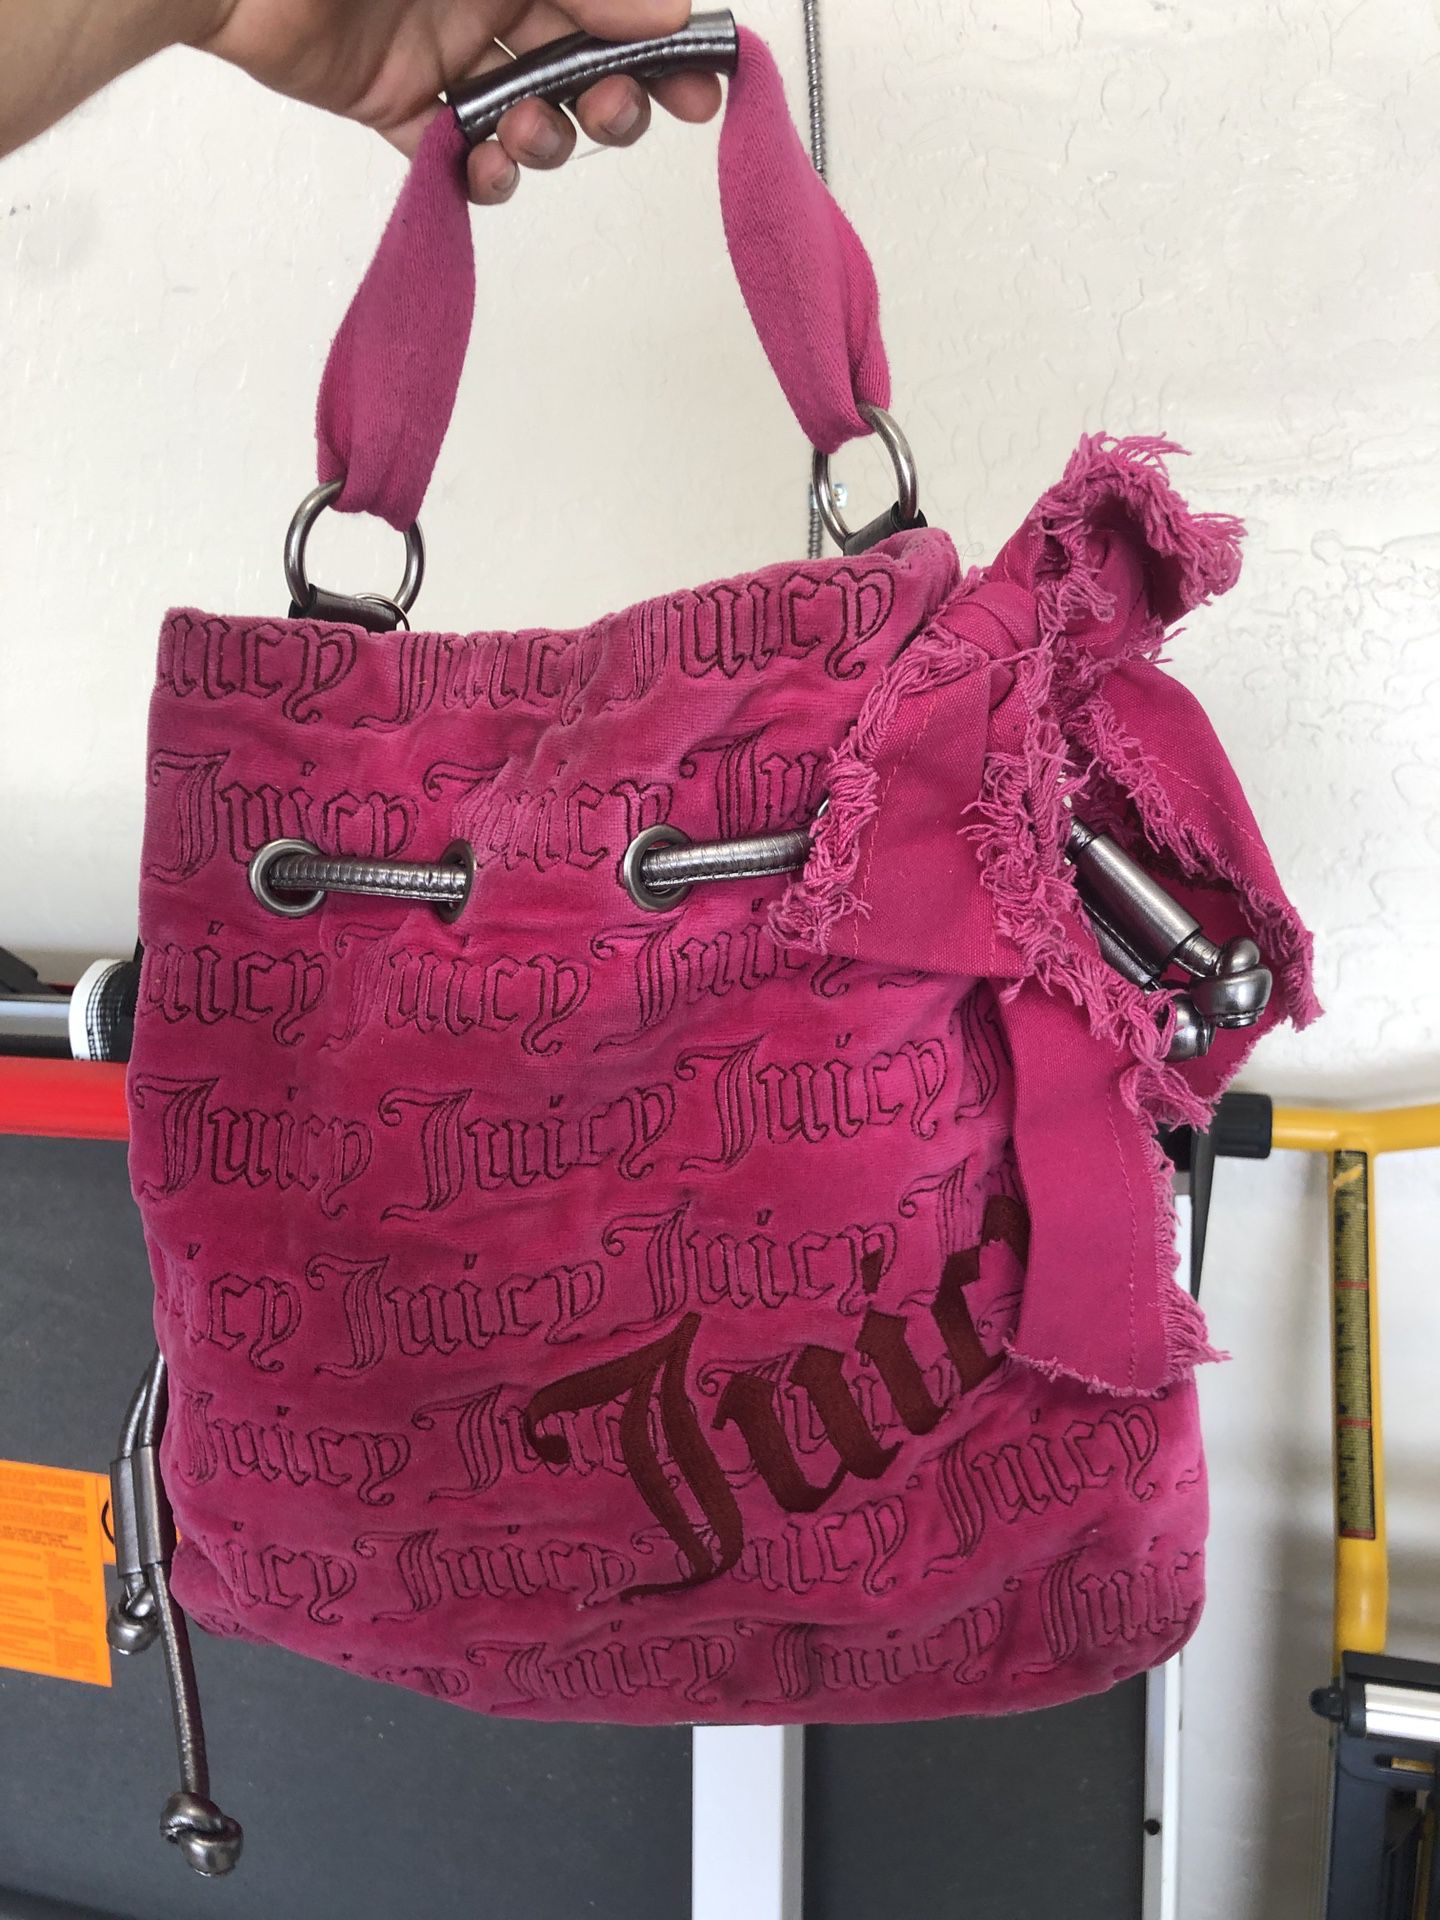 Juicy couture purse/backpack